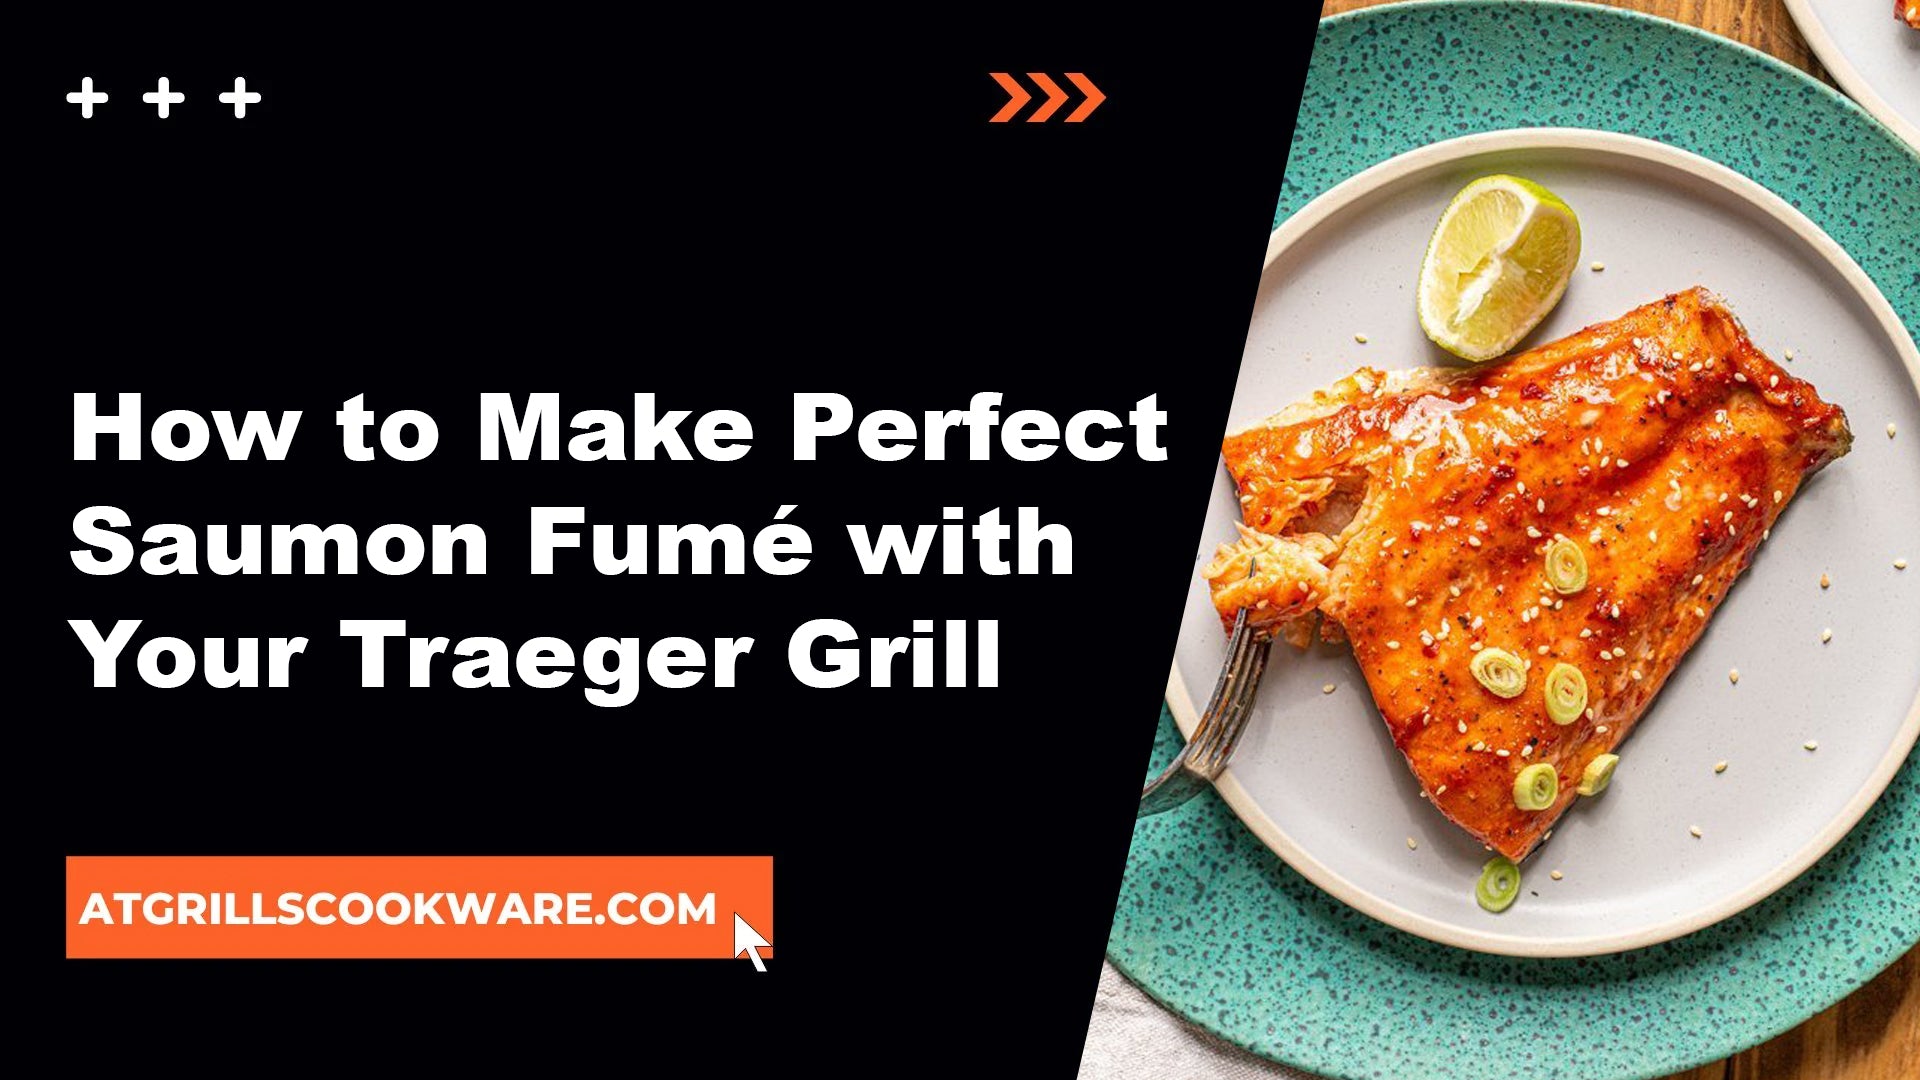 How to Make Perfect Saumon Fumé with Your Traeger Grill